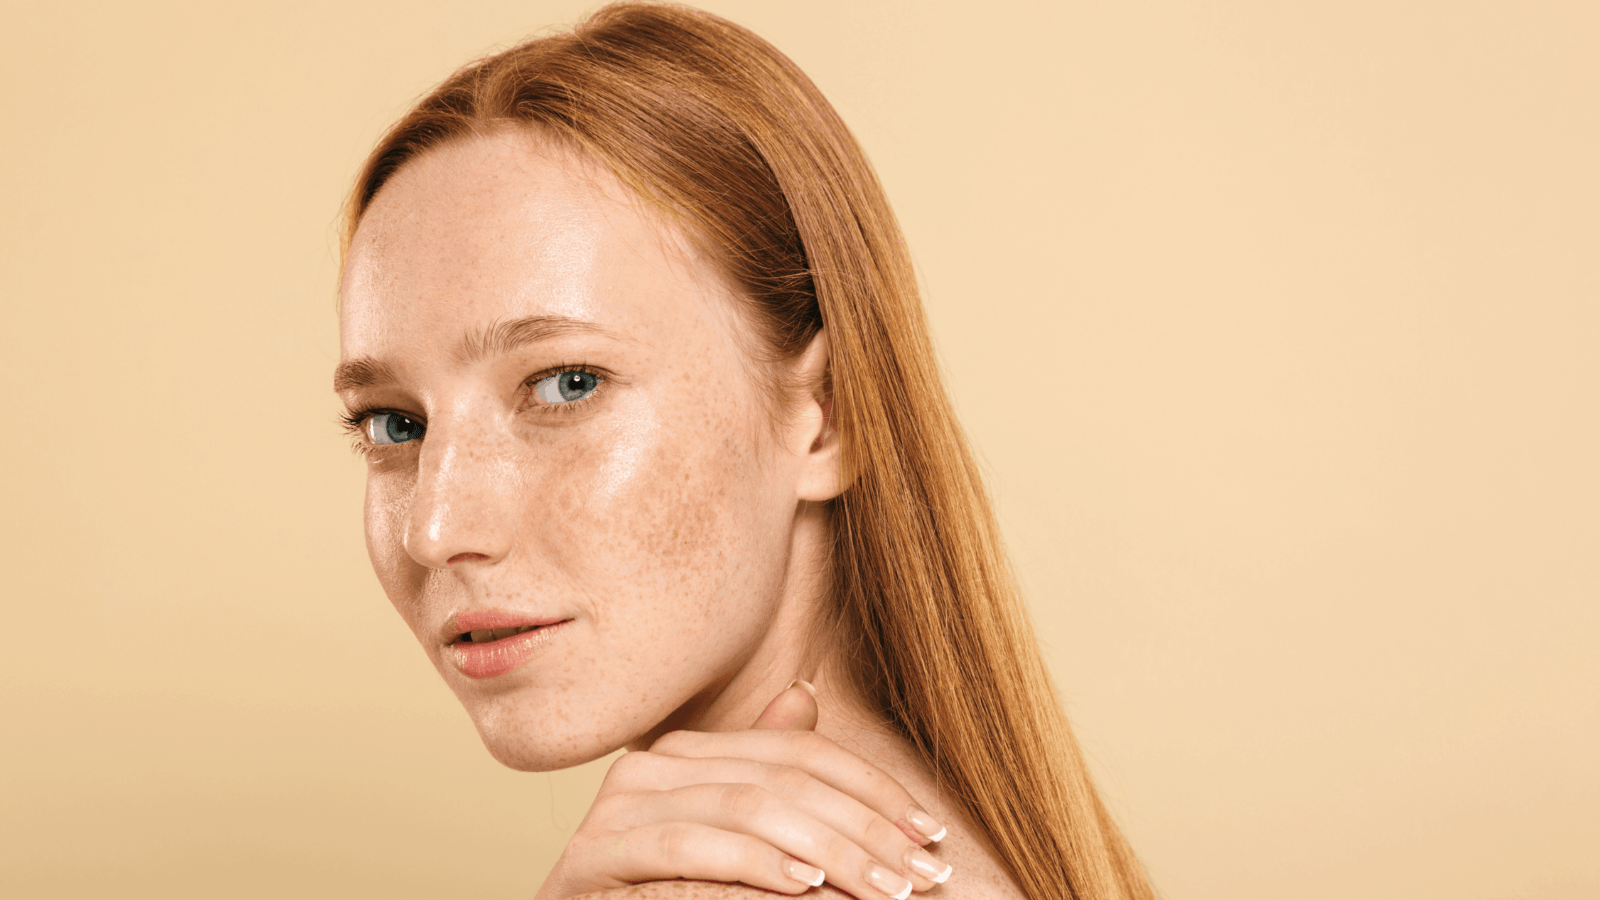 How Redheads Can Do a Skin Self-Exam at Home